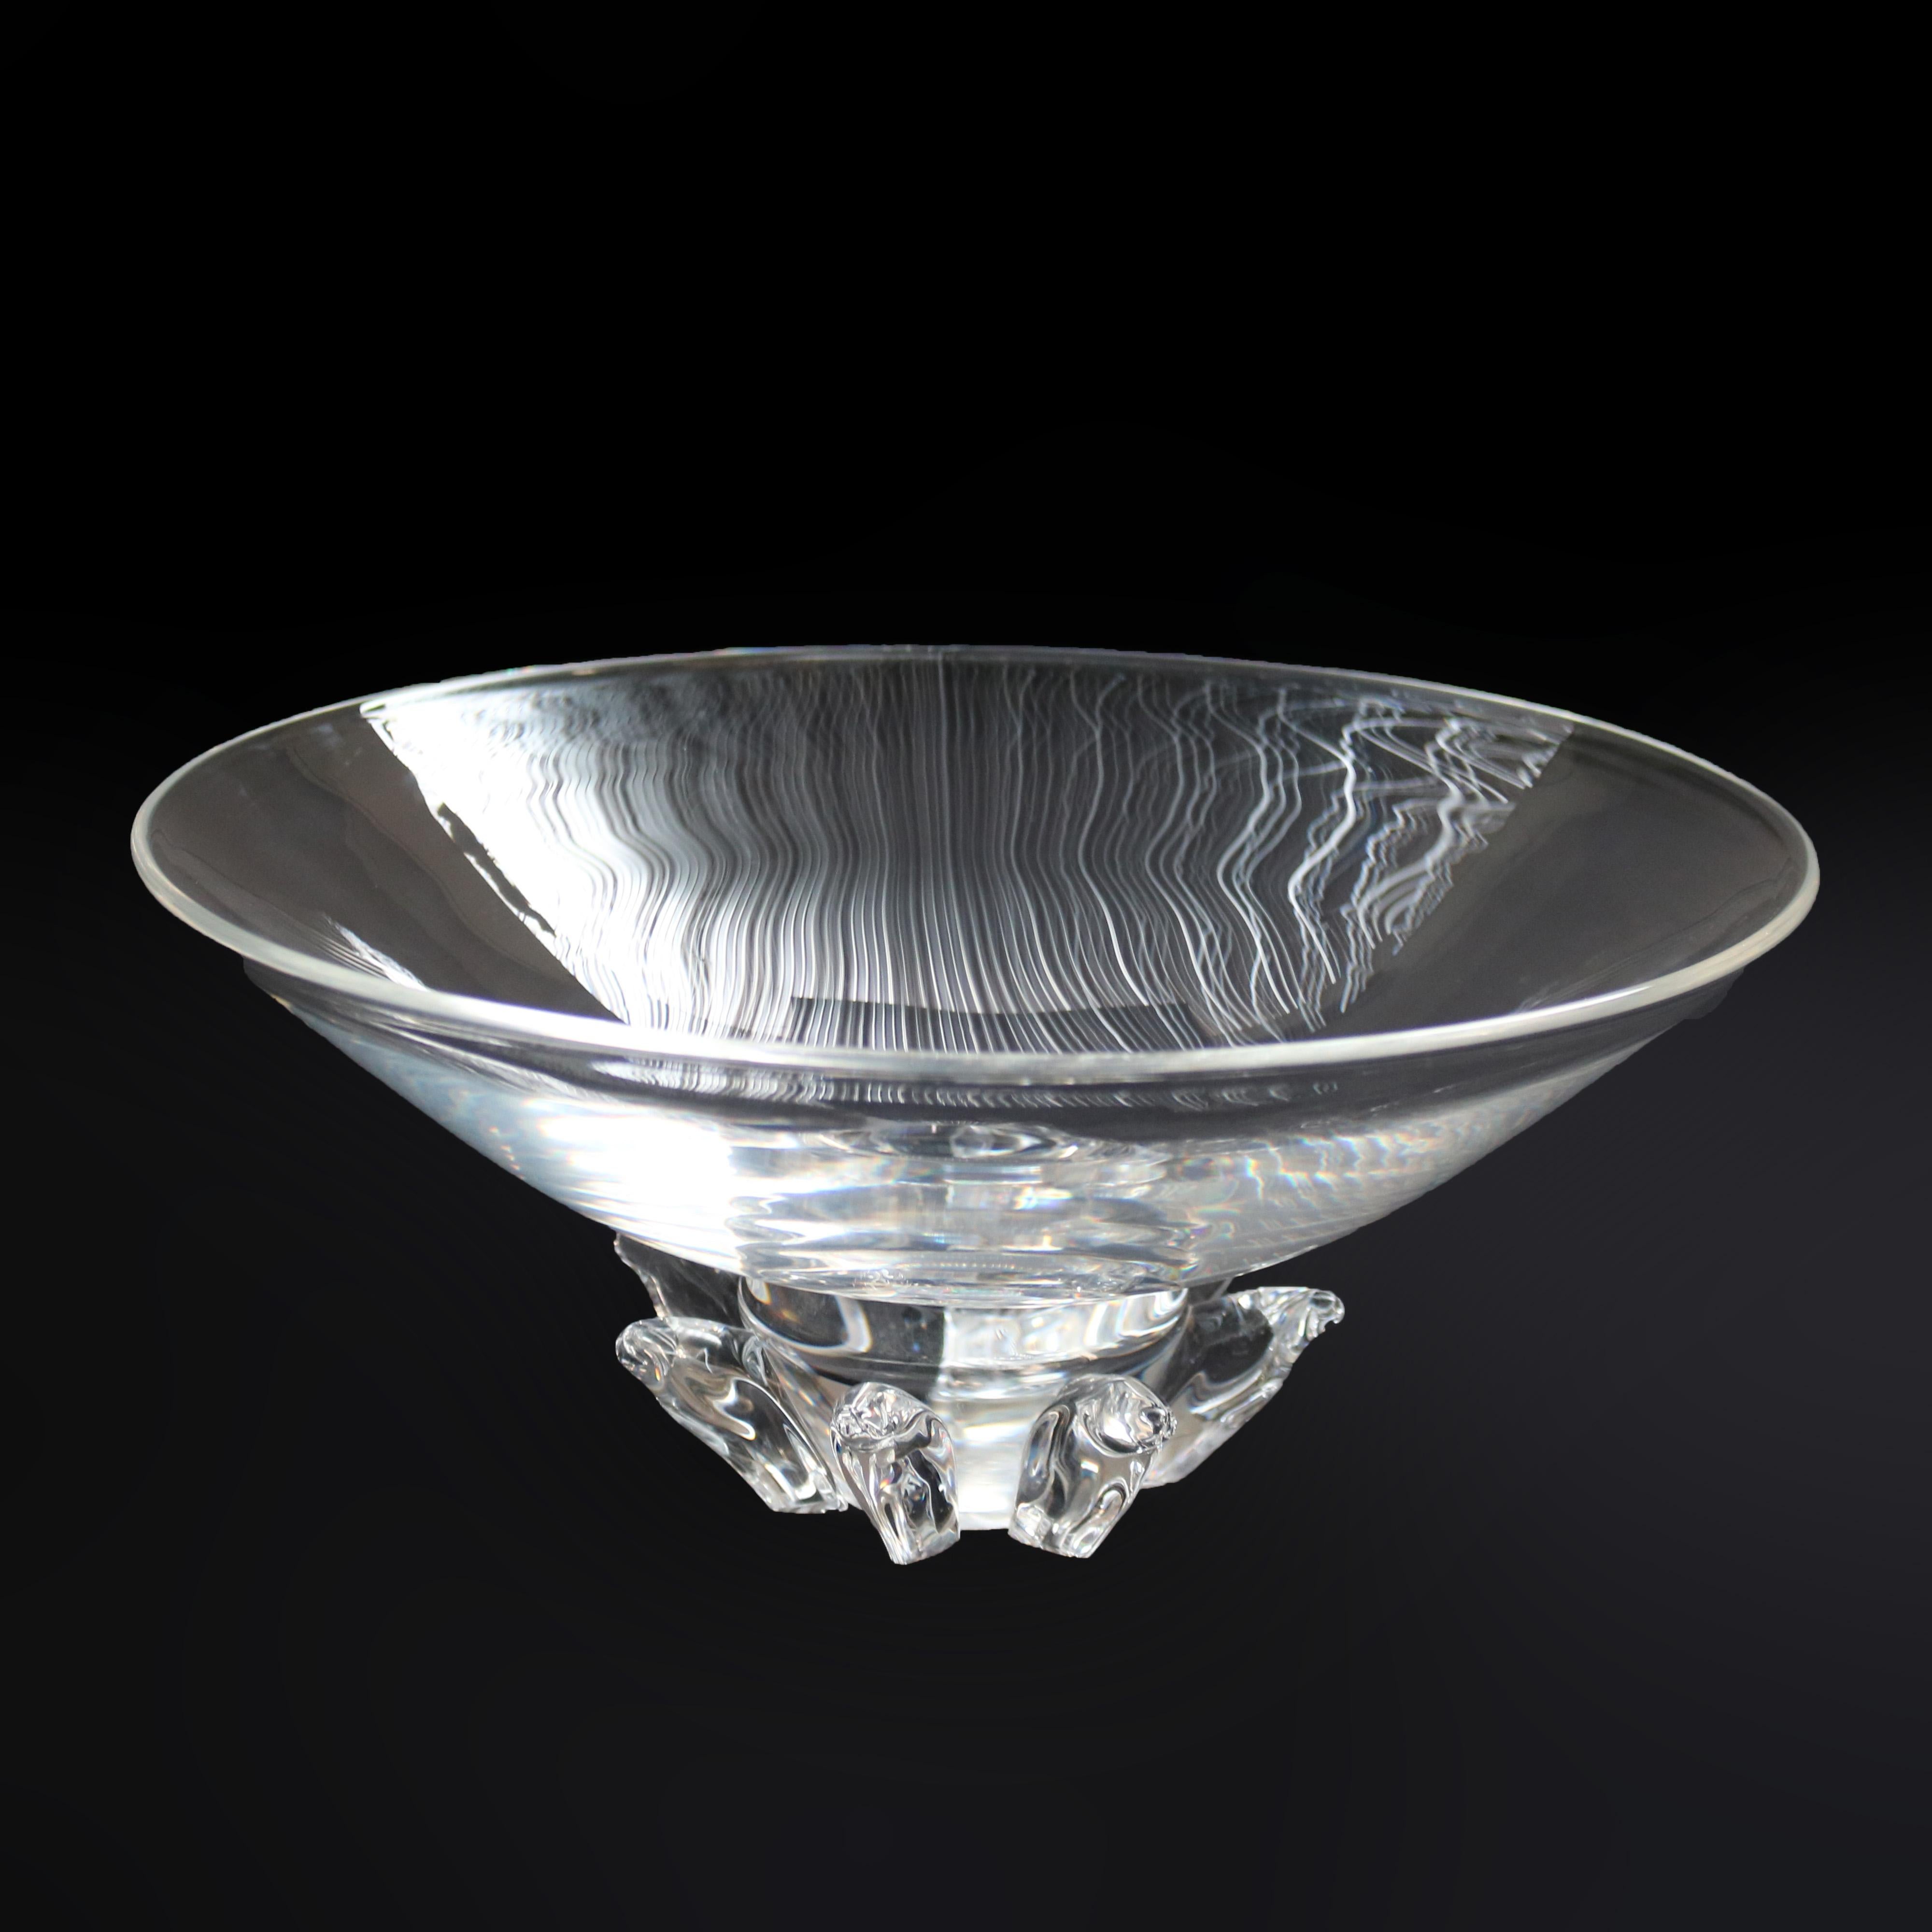 A large Mid-Century Modern center bowl by Steuben offers art glass construction with footed base and flared vessel, signed as photographed, c1960

Measures - 6'' H x 13'' W x 13'' D.